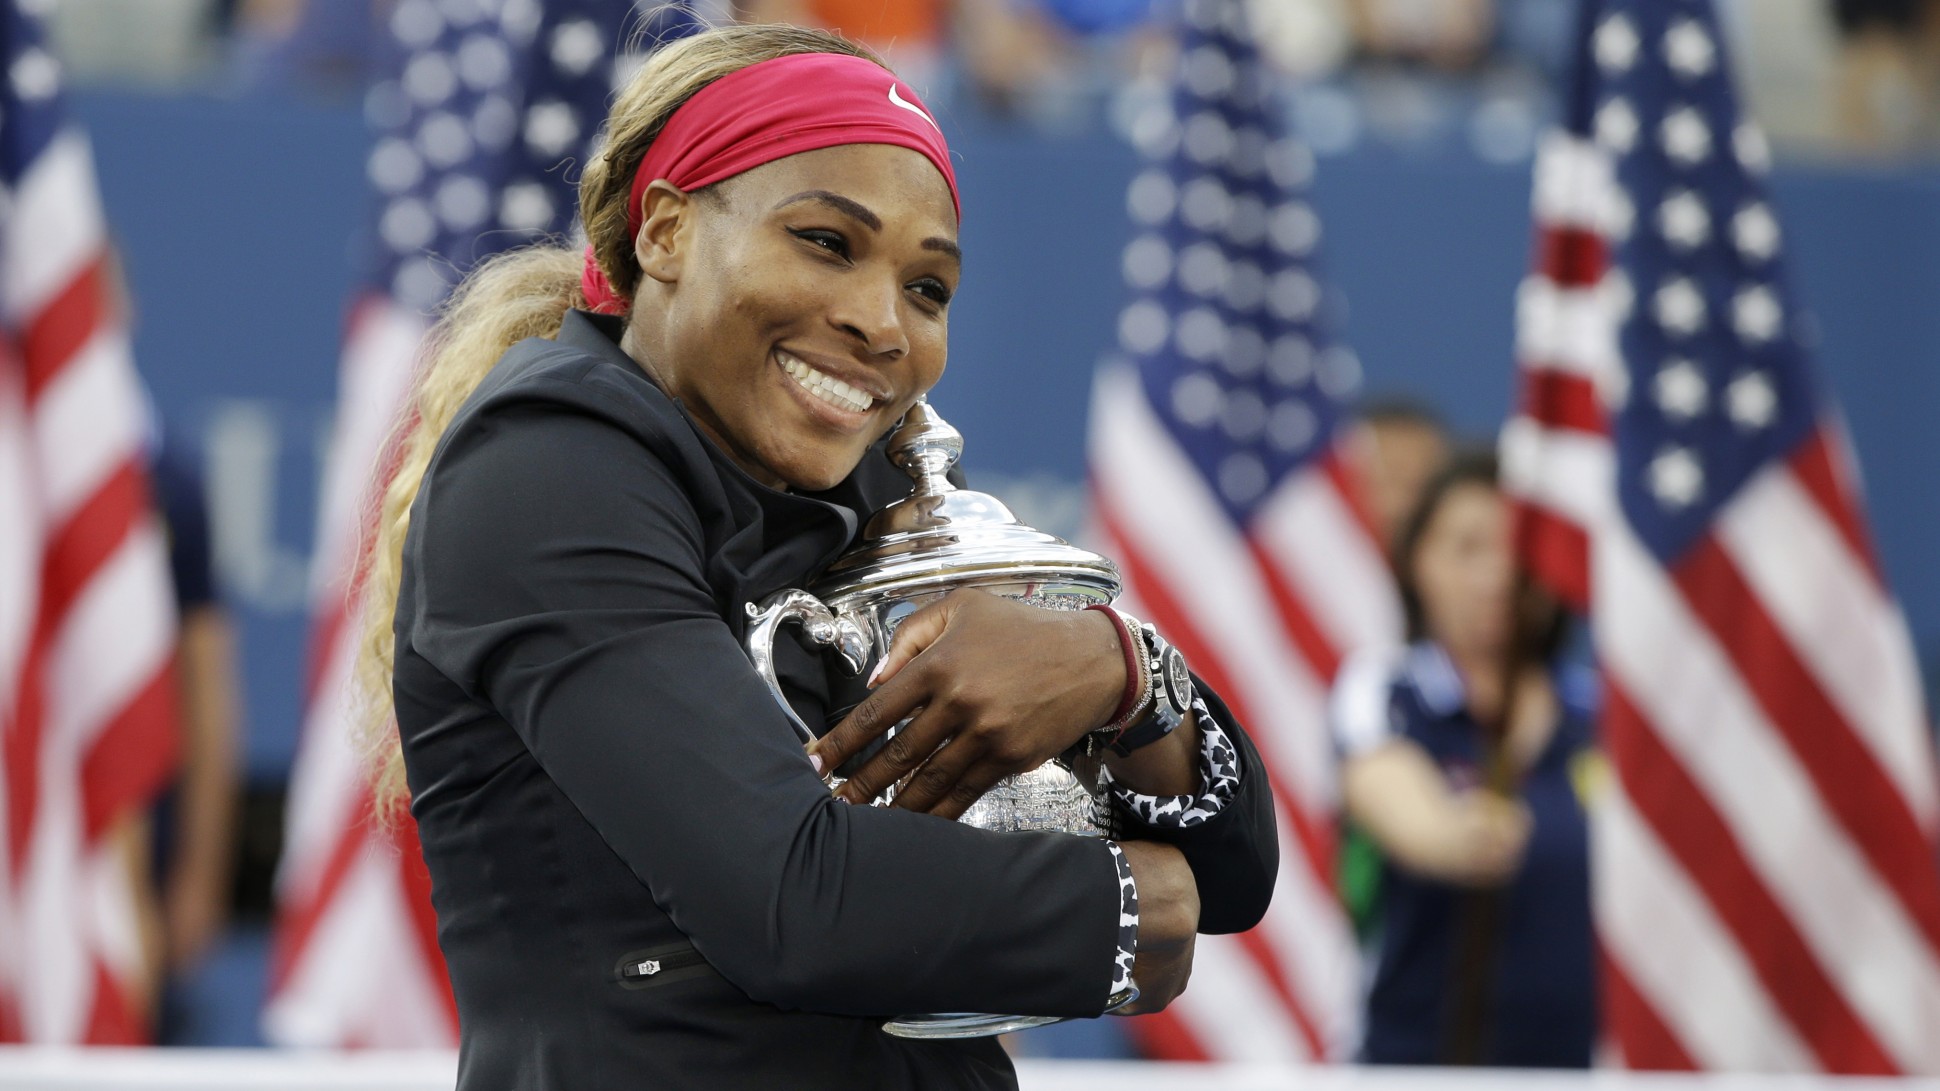 Armour: Baby Doesn’t Spell the End of Anything for Serena Williams